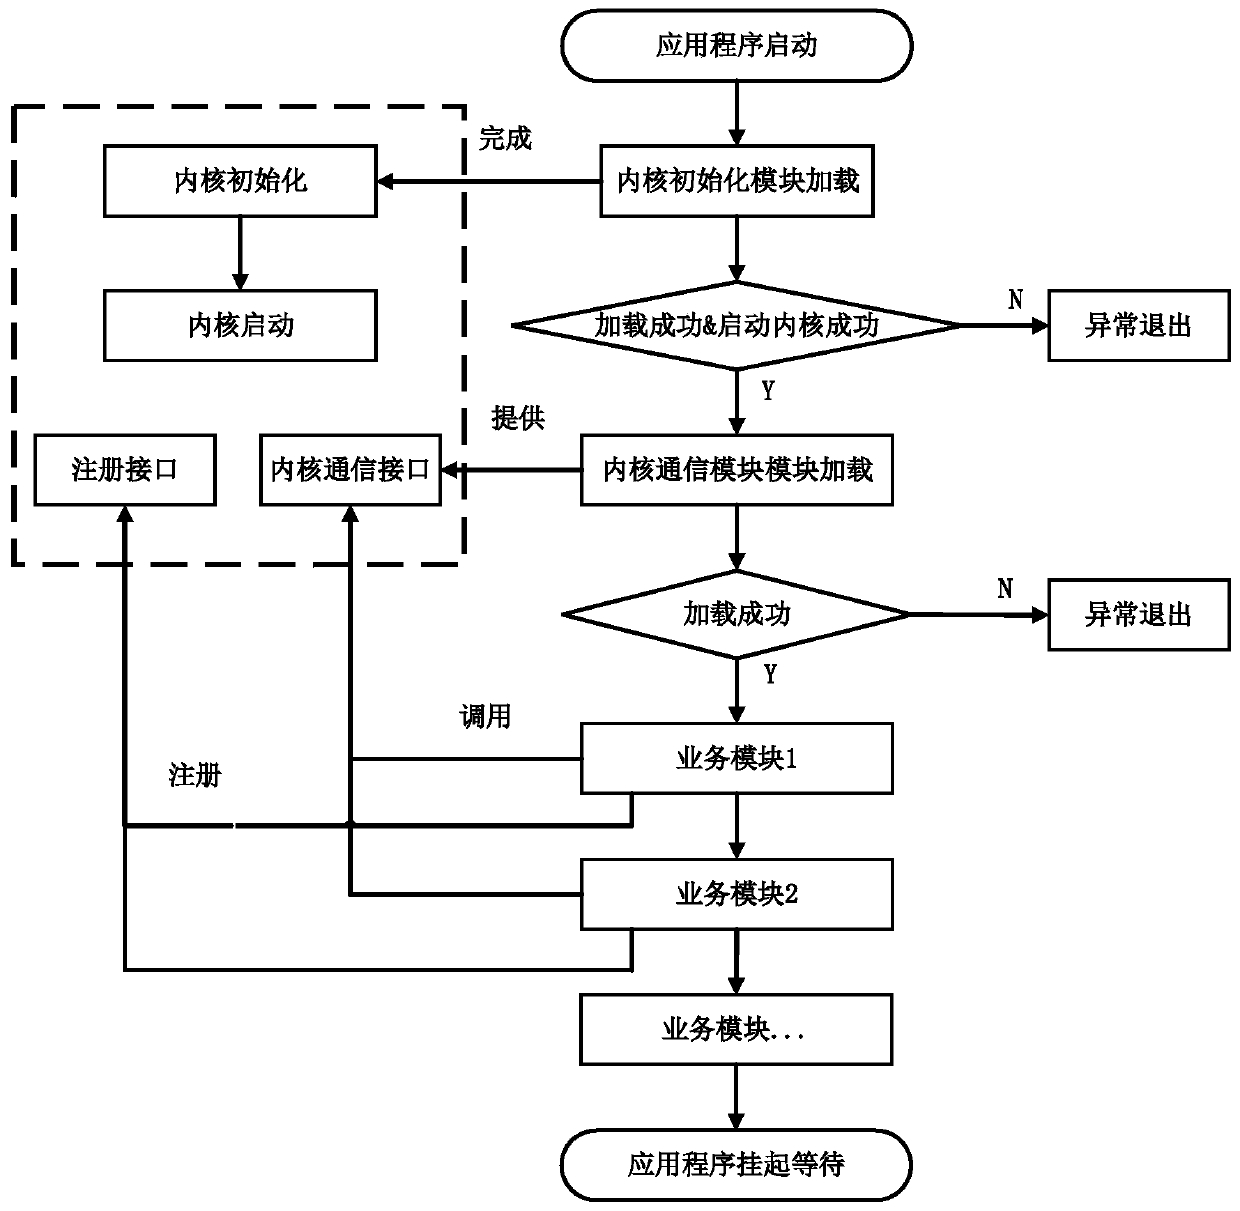 An application running method and application architecture